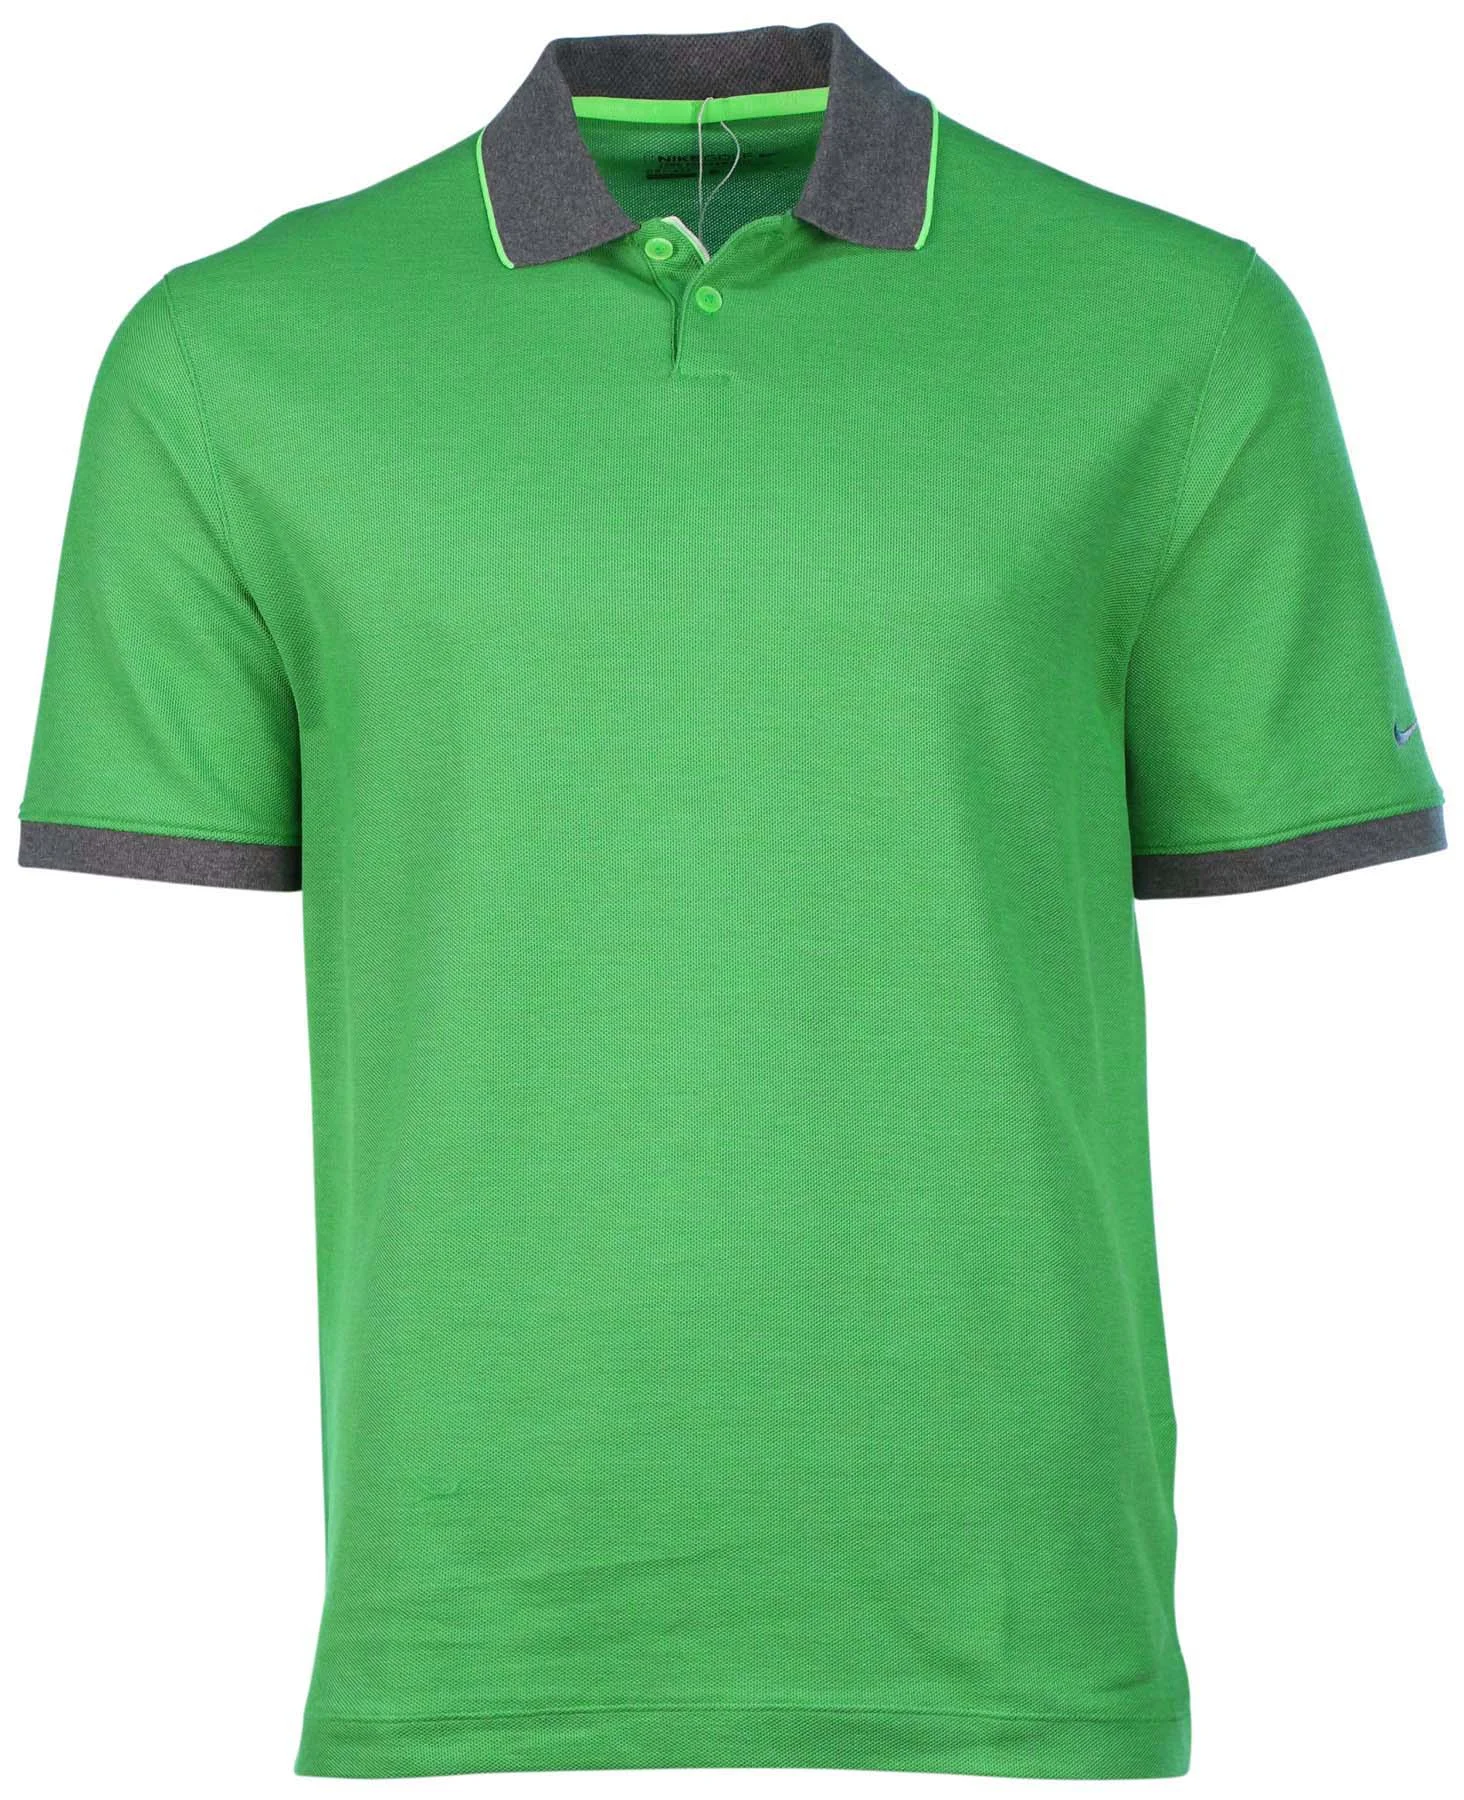 Dry Tipped Golf Polo Shirt